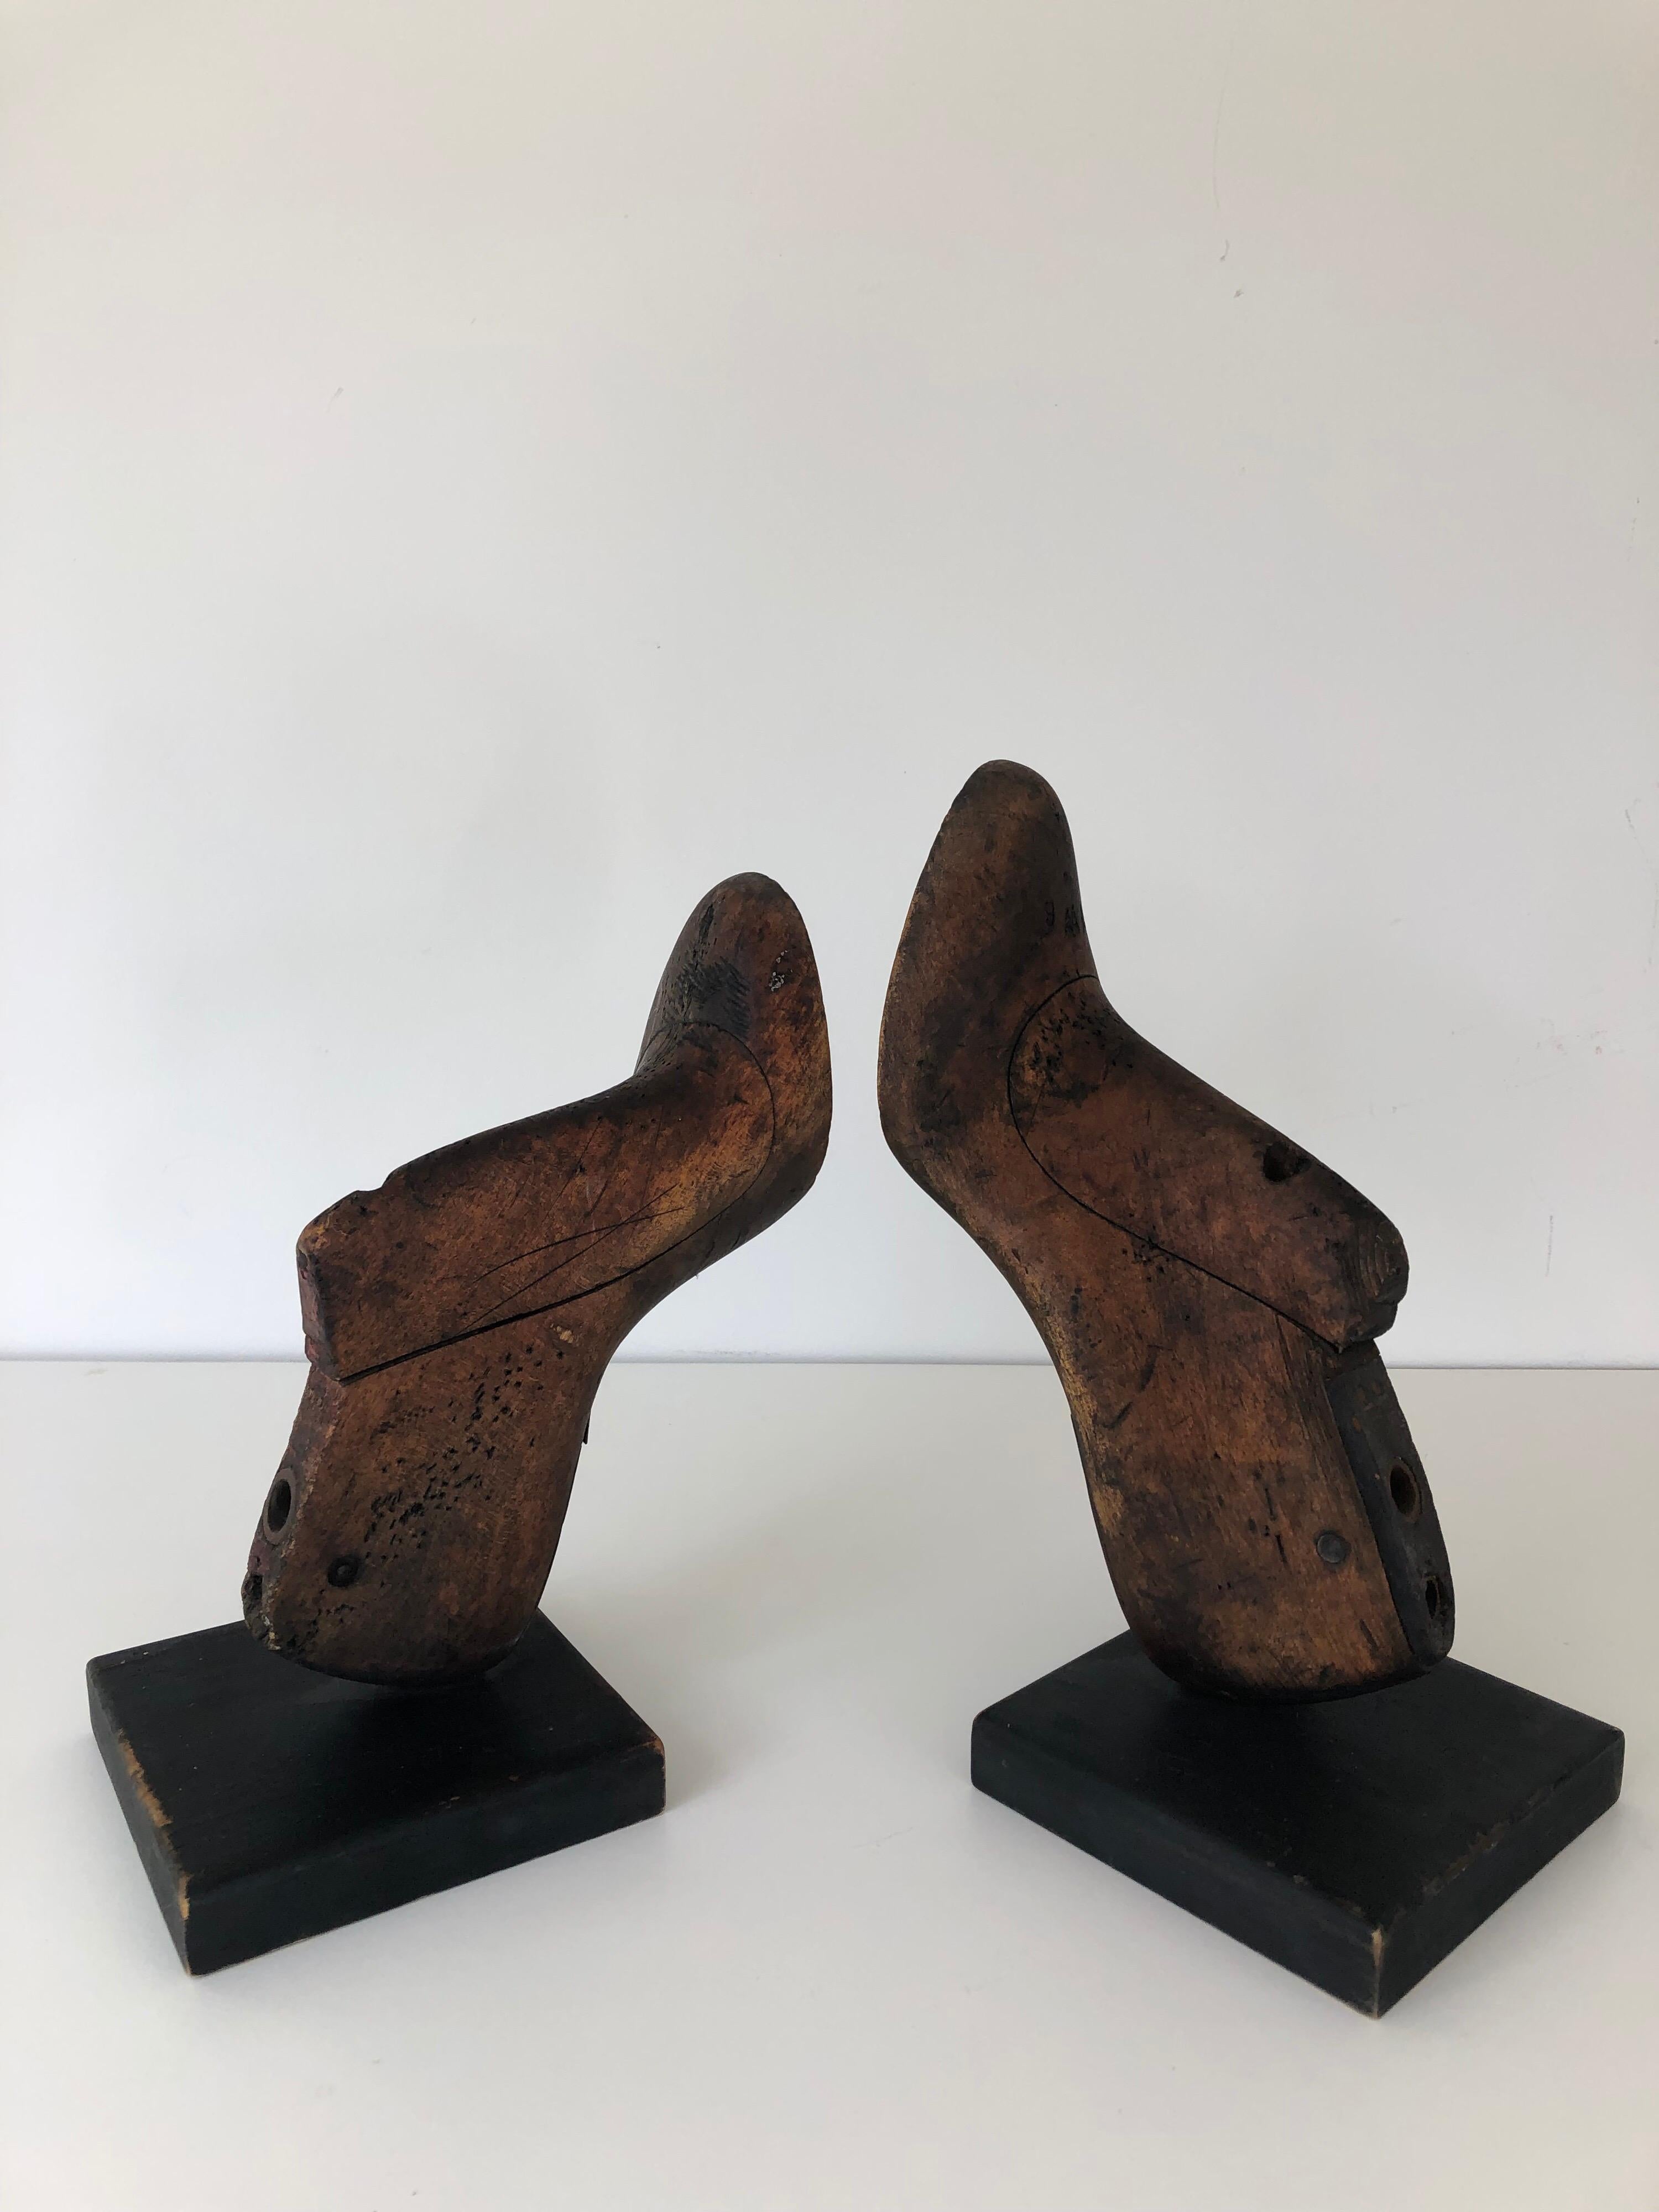 A pair of vintage wood shoe molds, now as bookends. Mounted on black painted base.